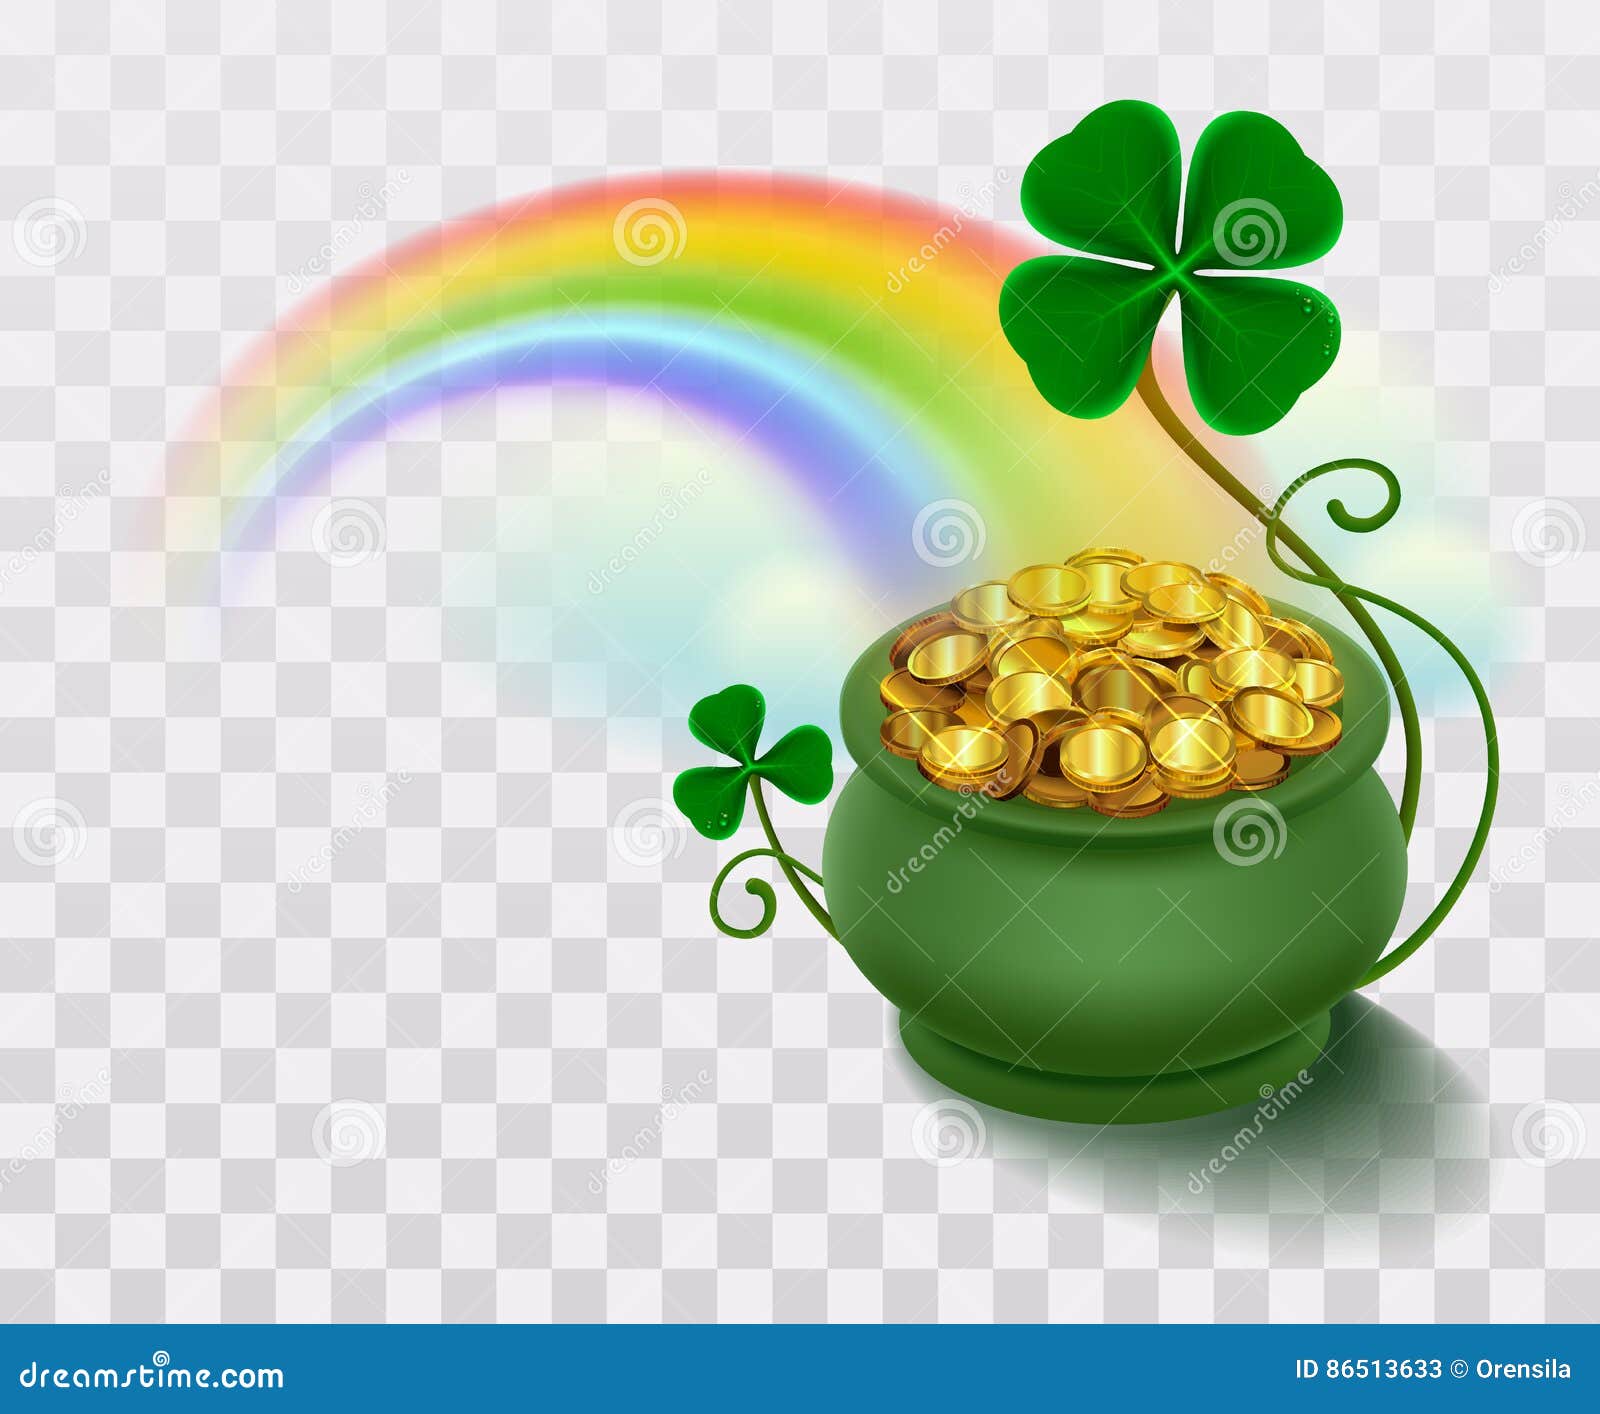 rainbow, green leaf lucky clover and pot full of gold